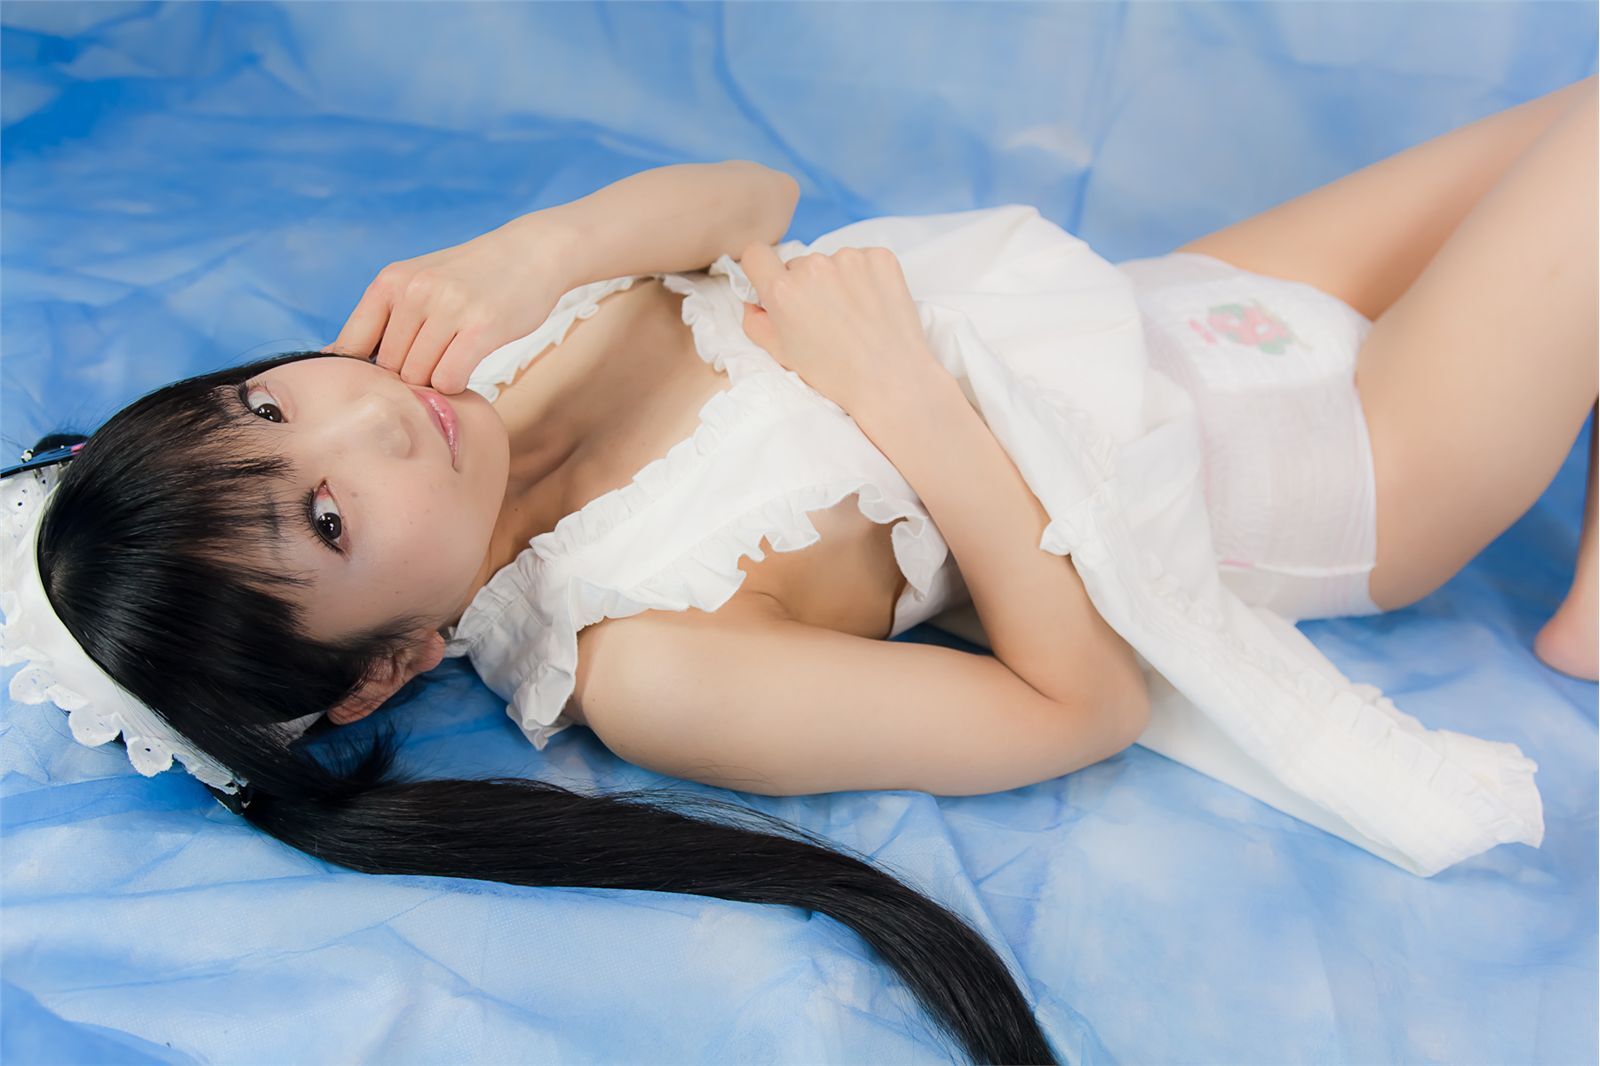 Cosplay Japanese beauty sexy! Type D Part 2